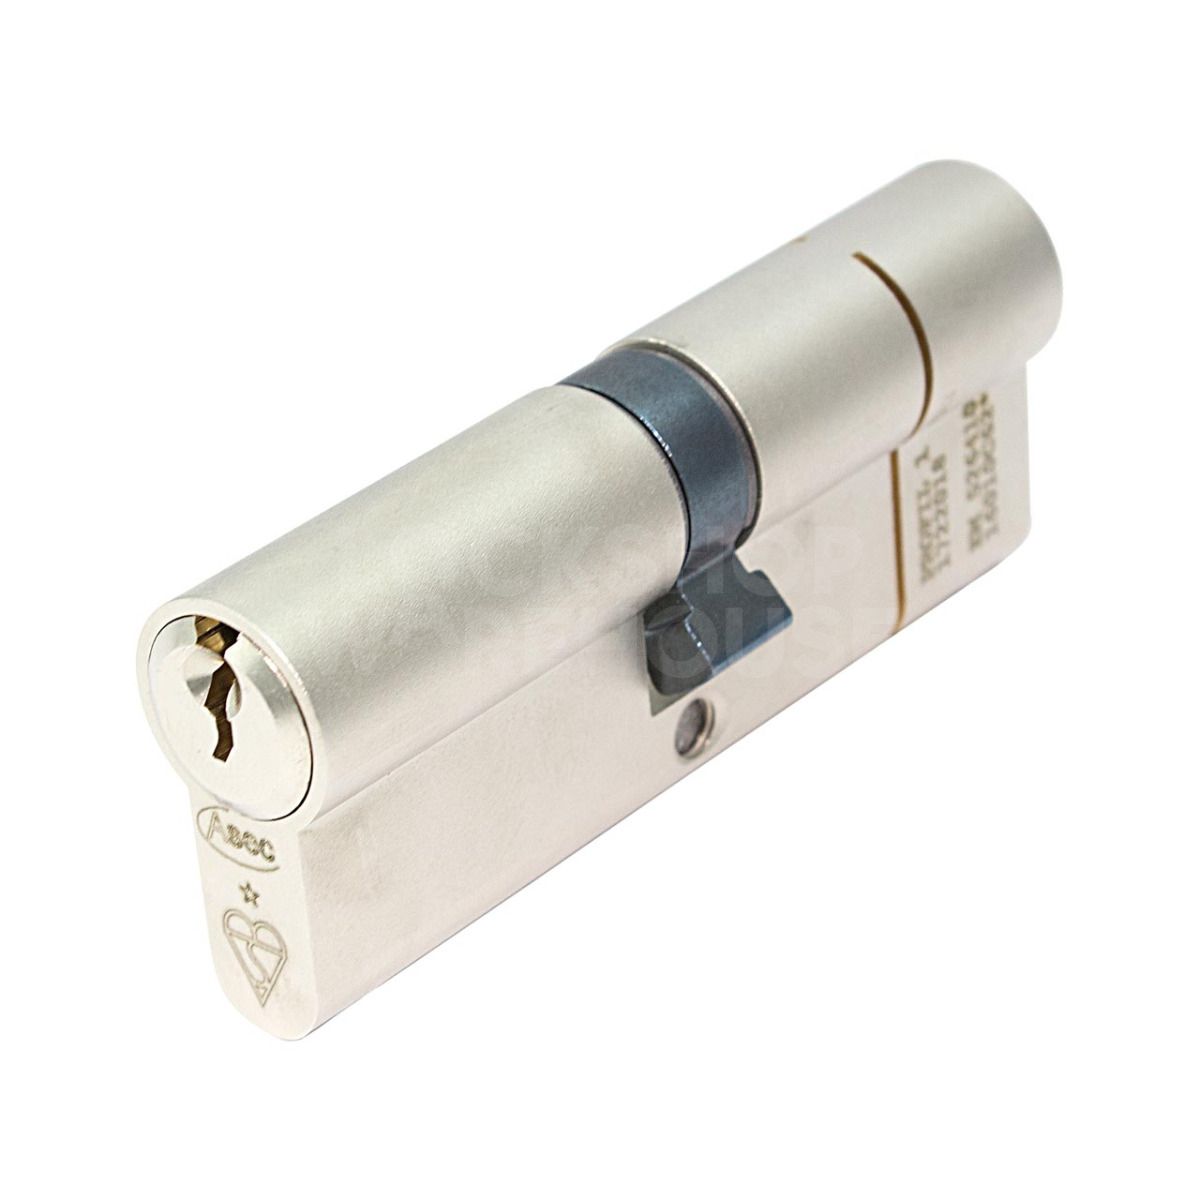 ASEC Euro Double Kitemarked Cylinders